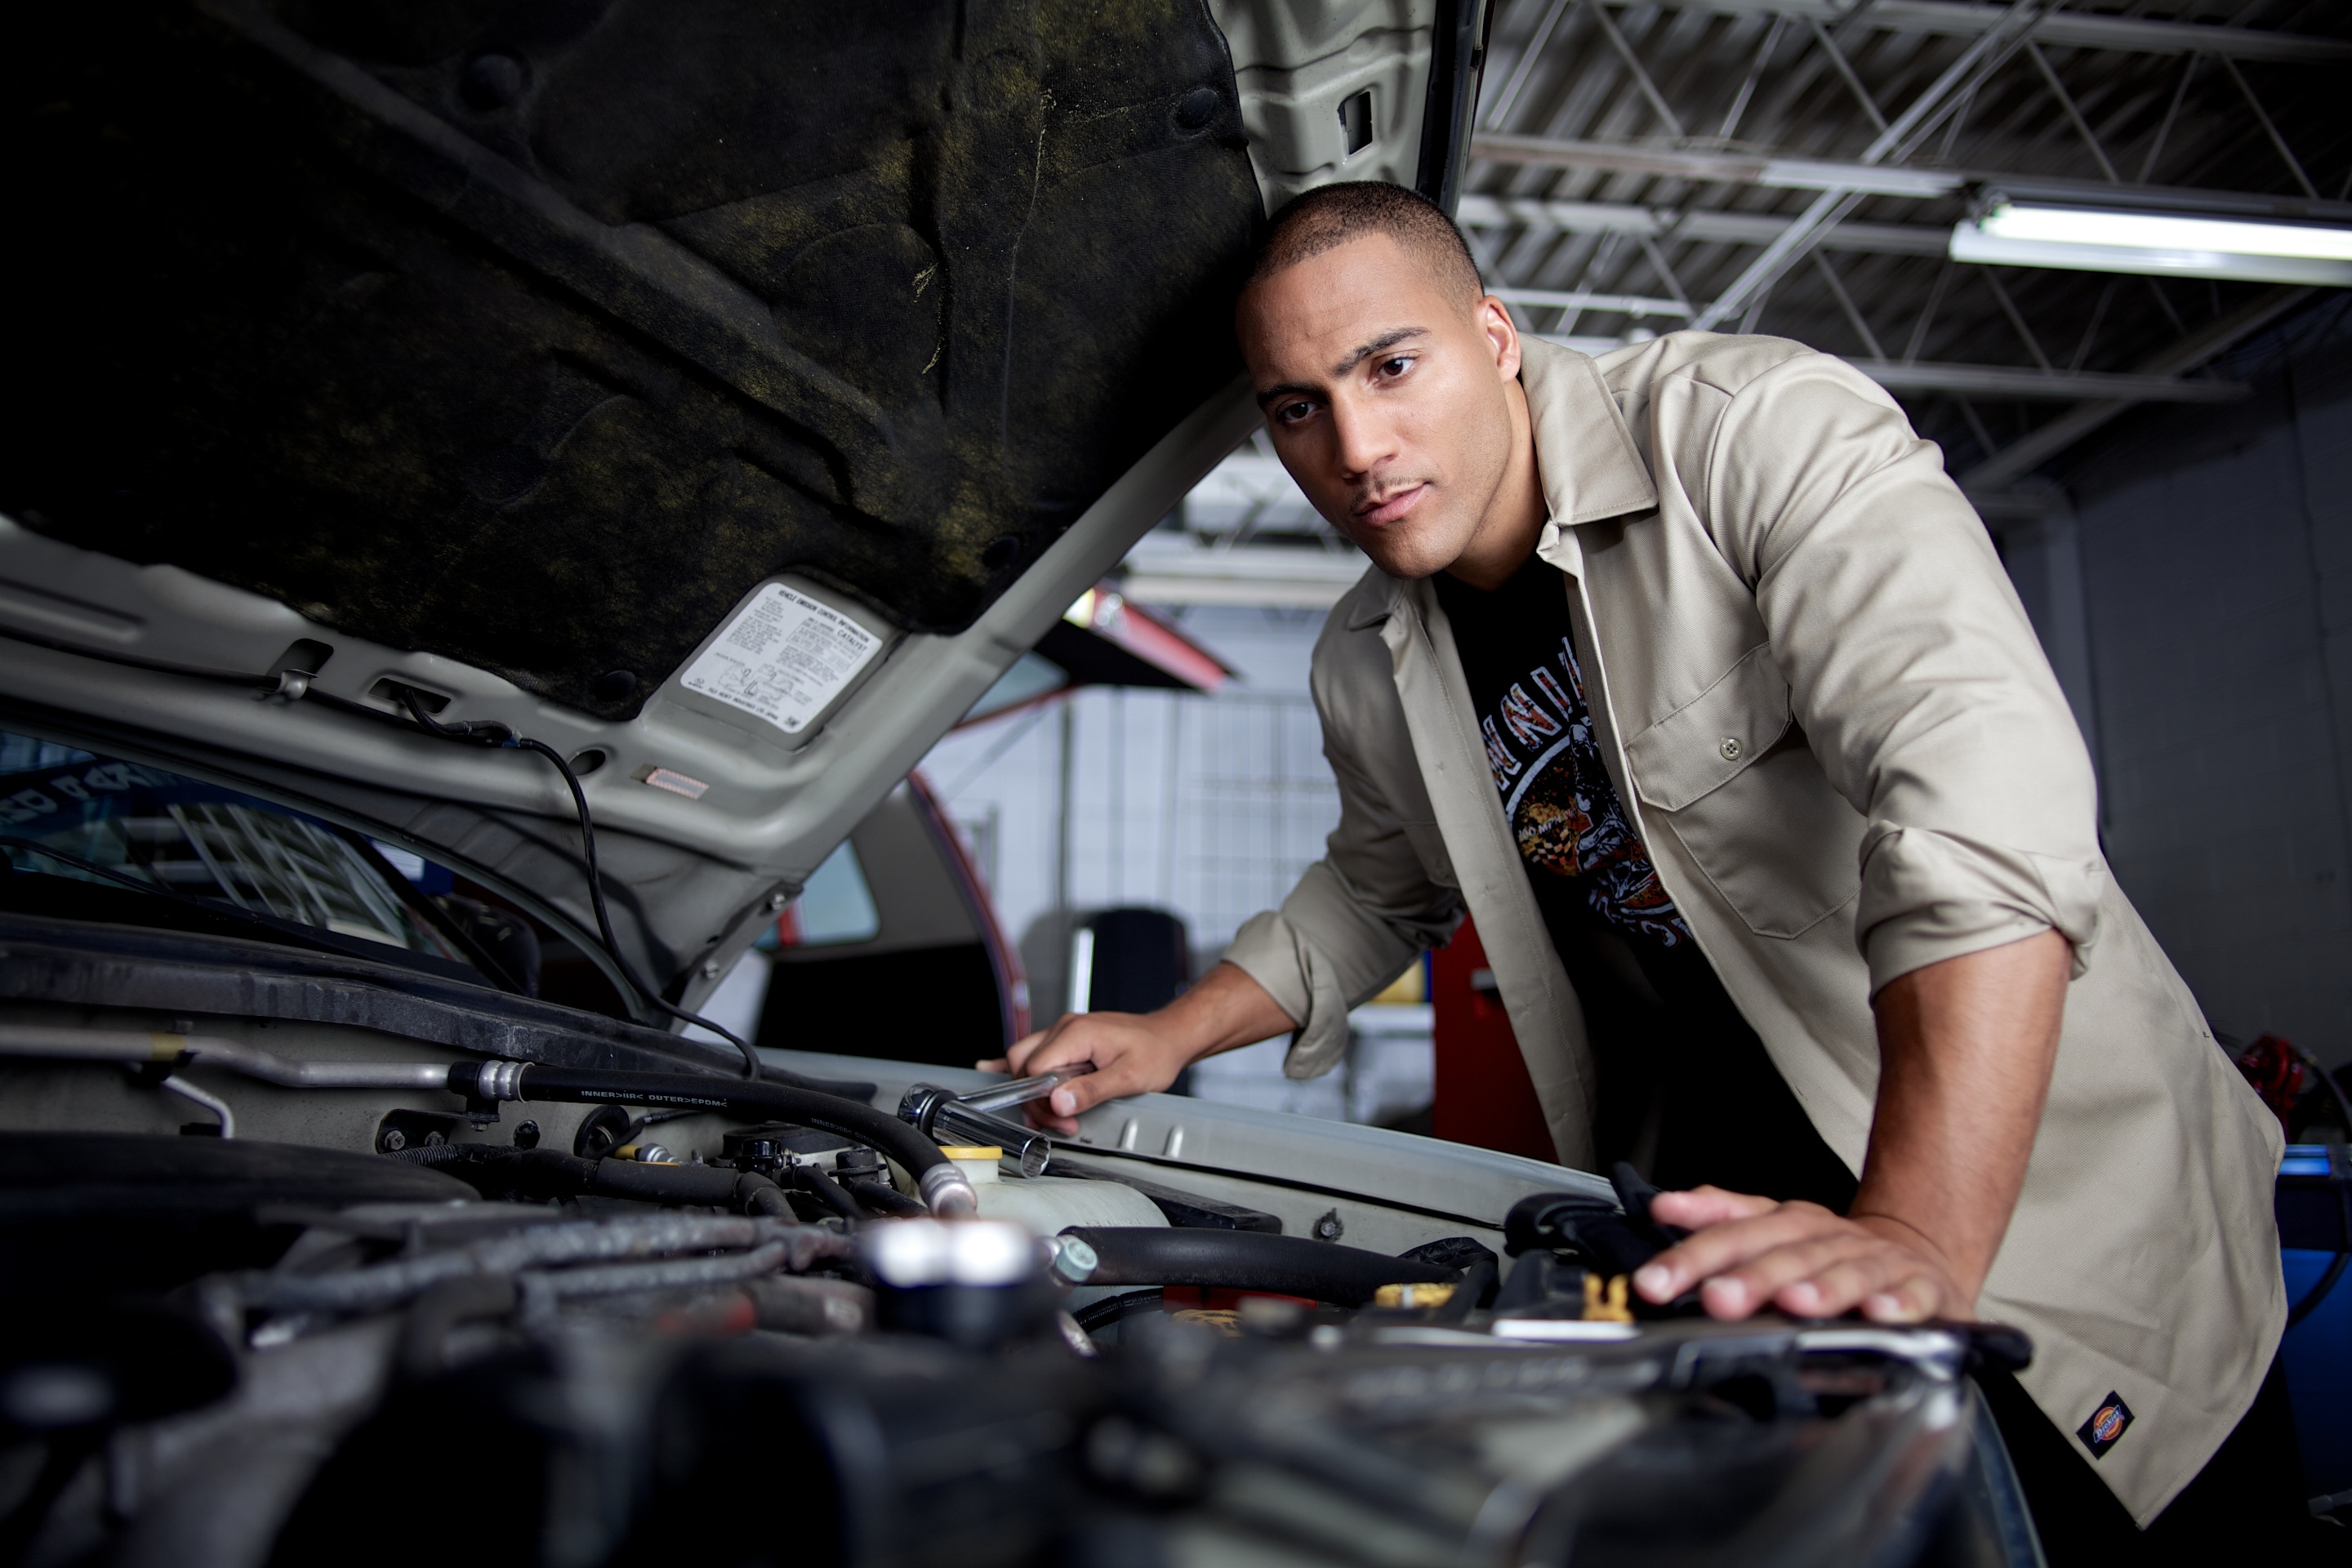 retail fashion photography of a mechanic working on a car by travis neely